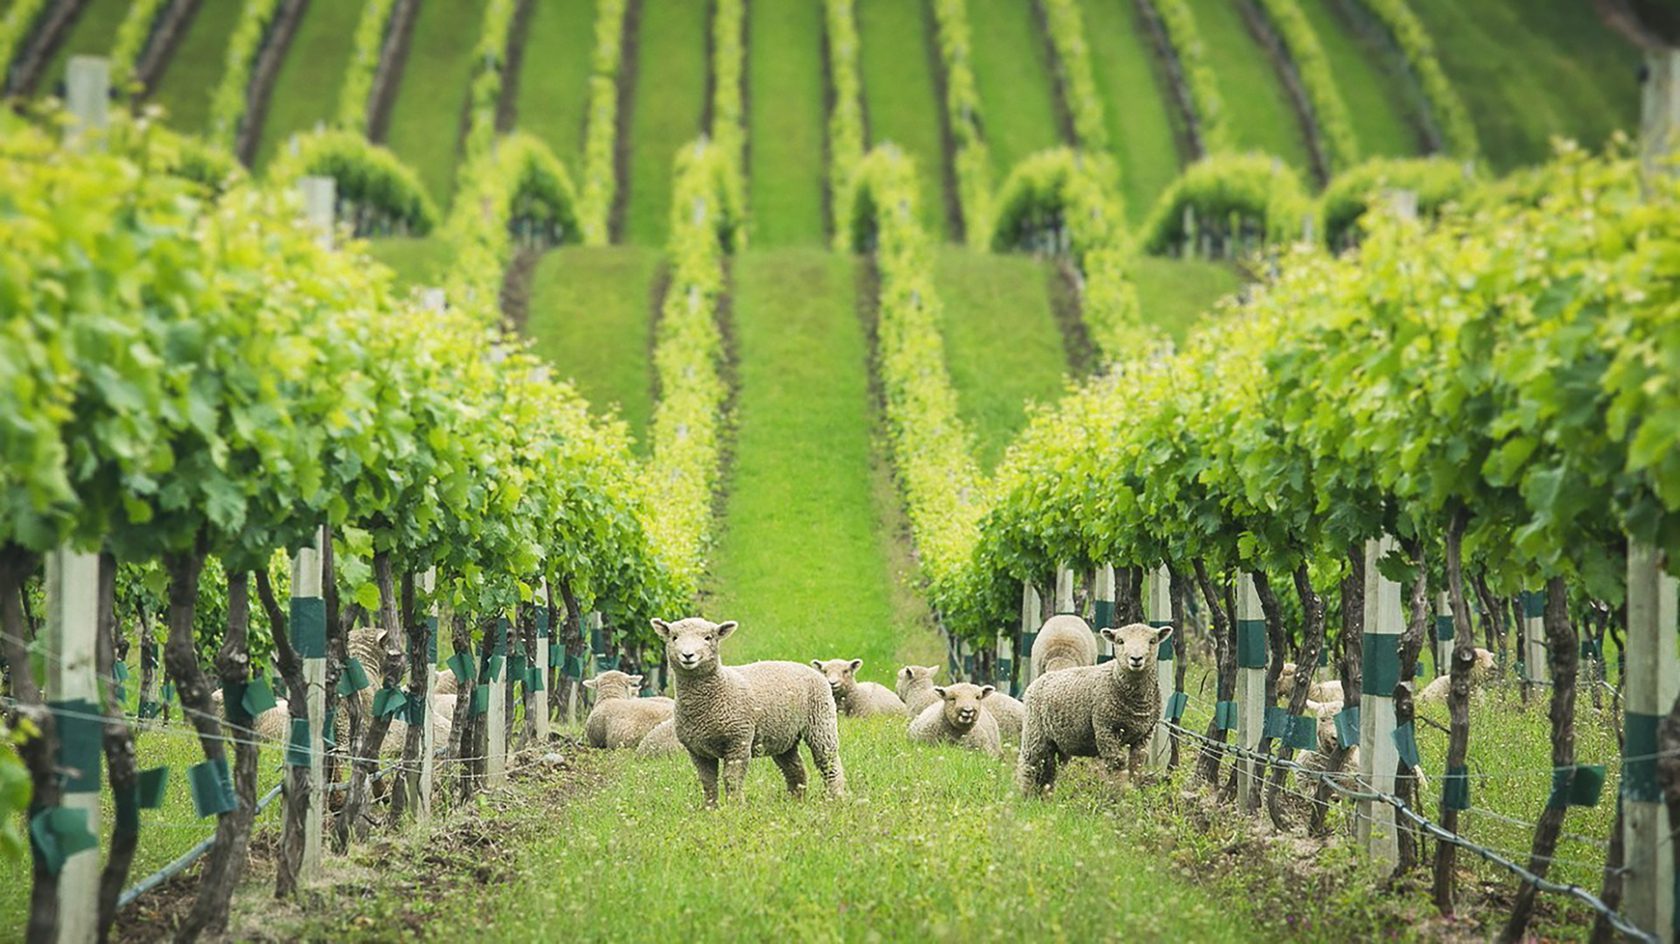 Image of baby sheep in a vineyard